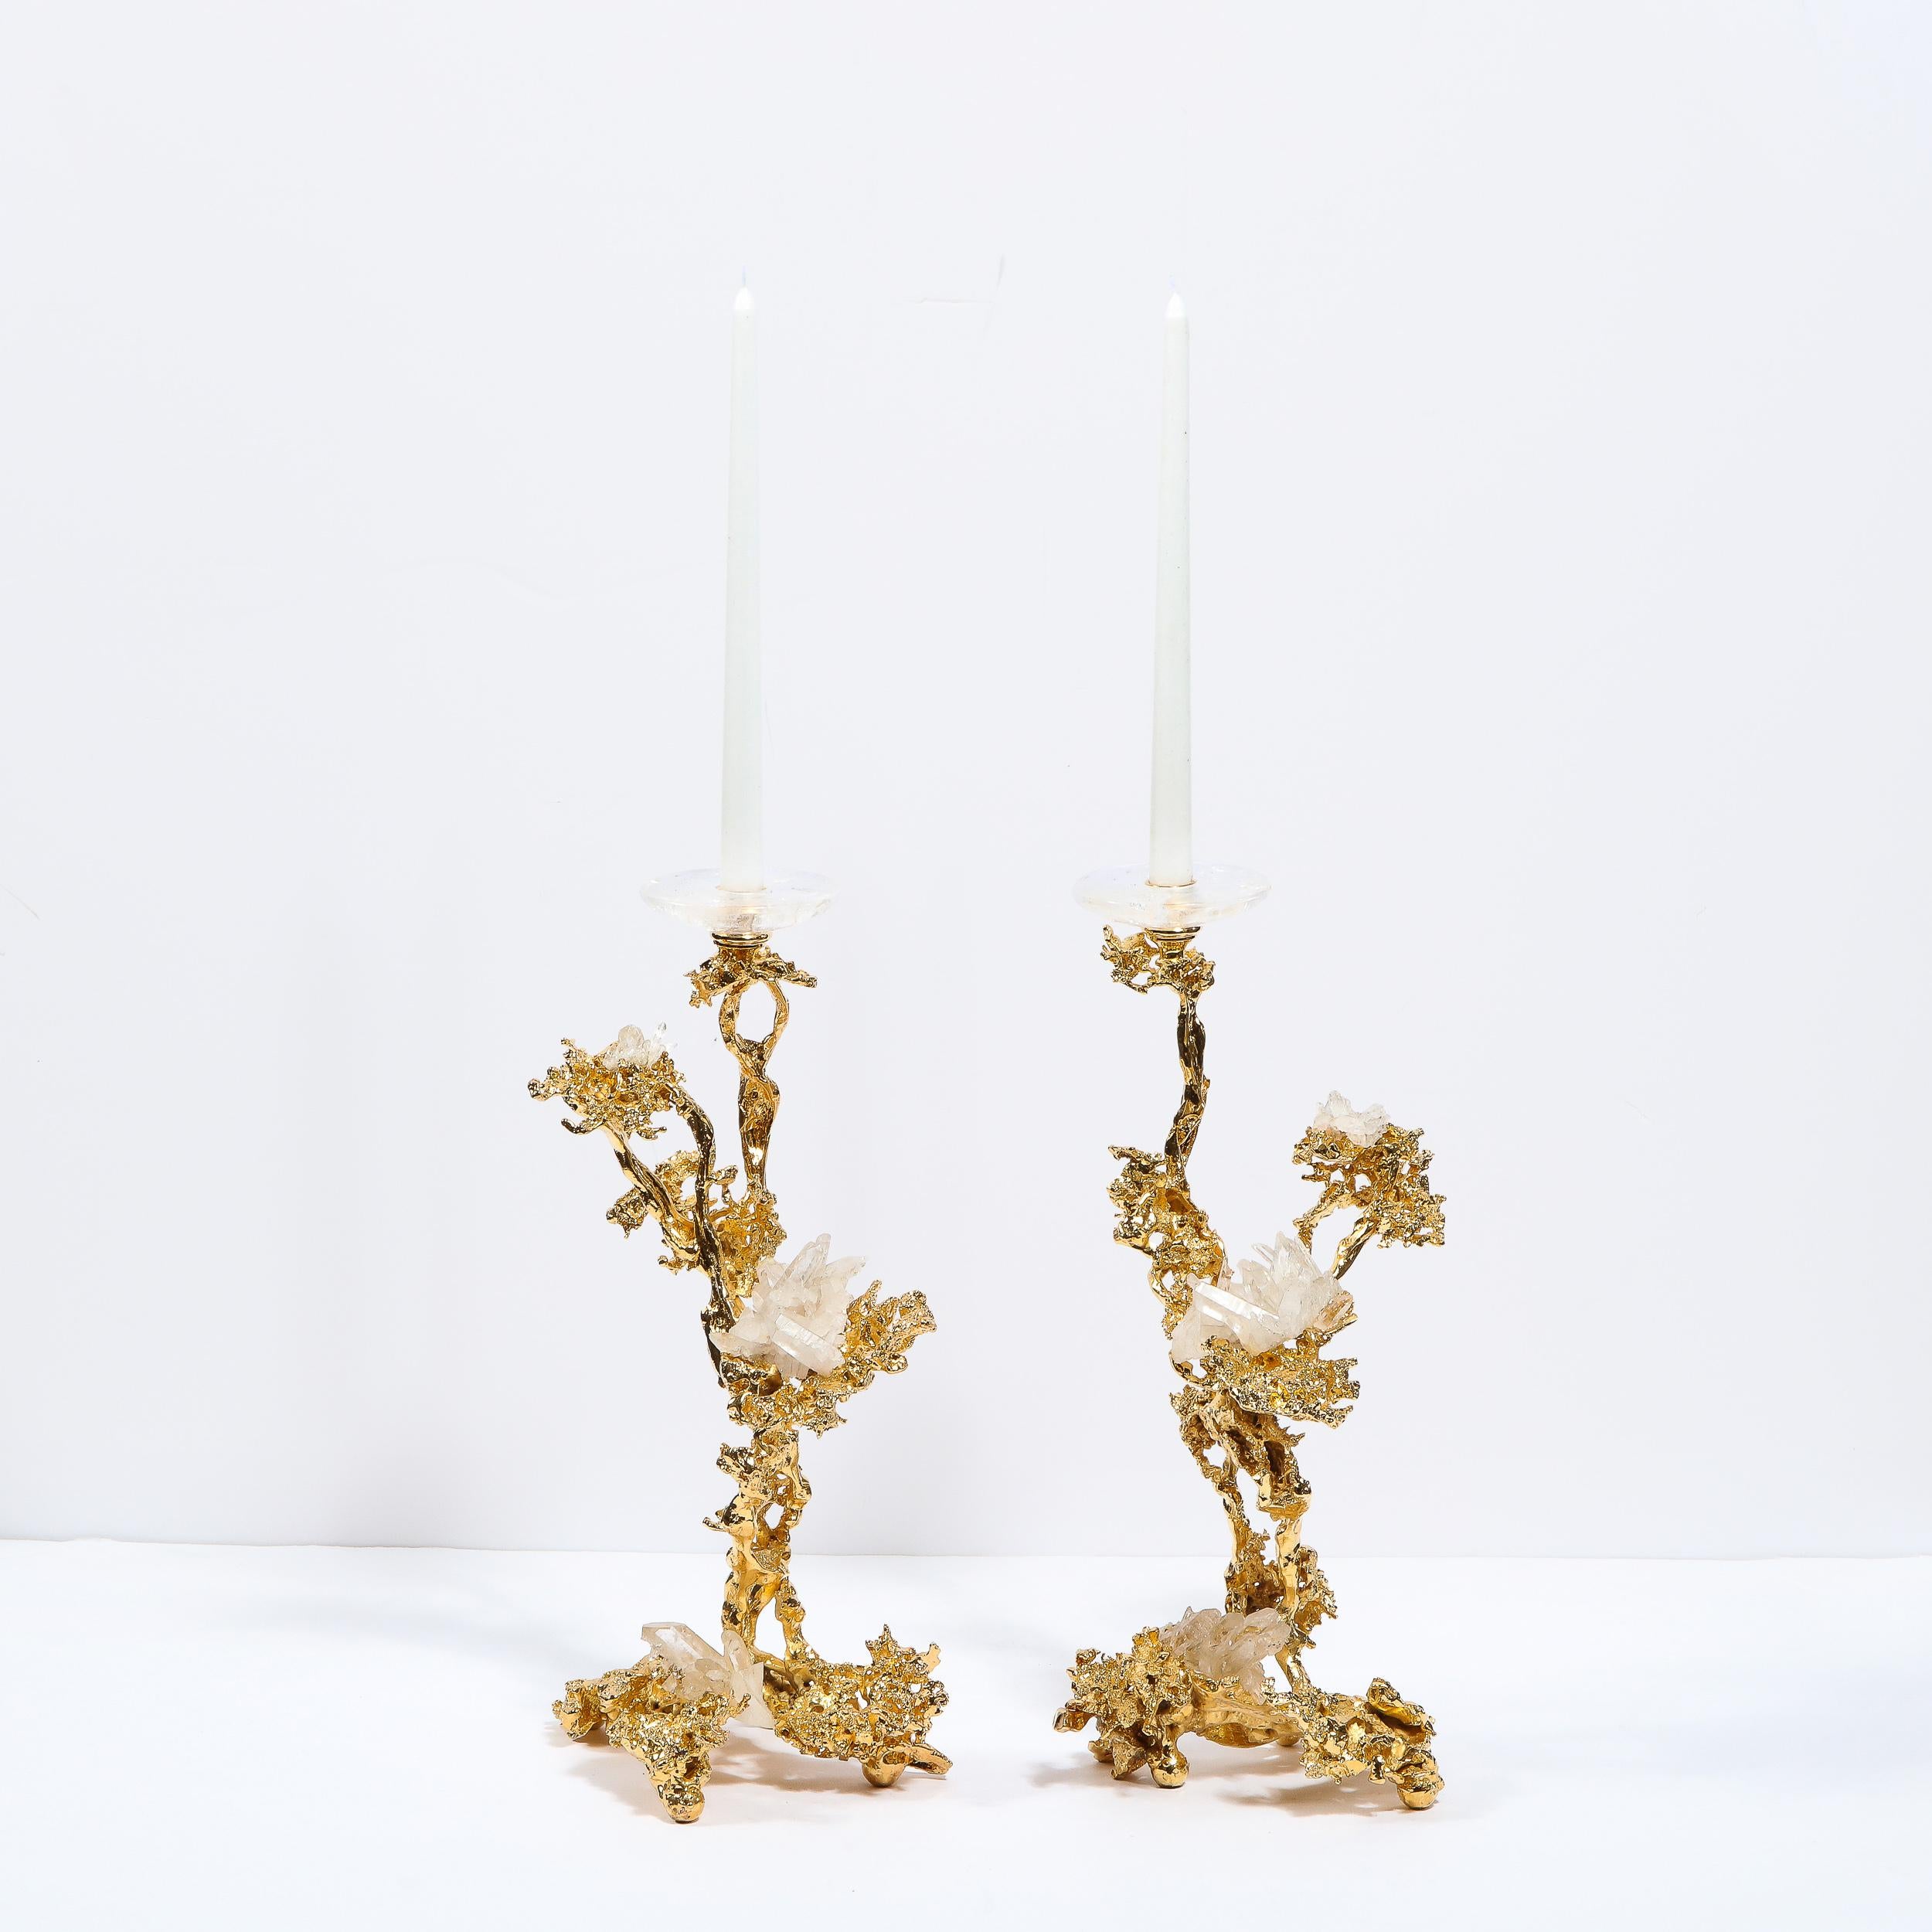 This dramatic and elegant pair of Mid-Century Modern candlesticks were realized in France by the esteemed artisan Claude Victor Boeltz. They offer an exploded form sculpted, by hand, and cast in bronze, consisting of a single arm and three feet